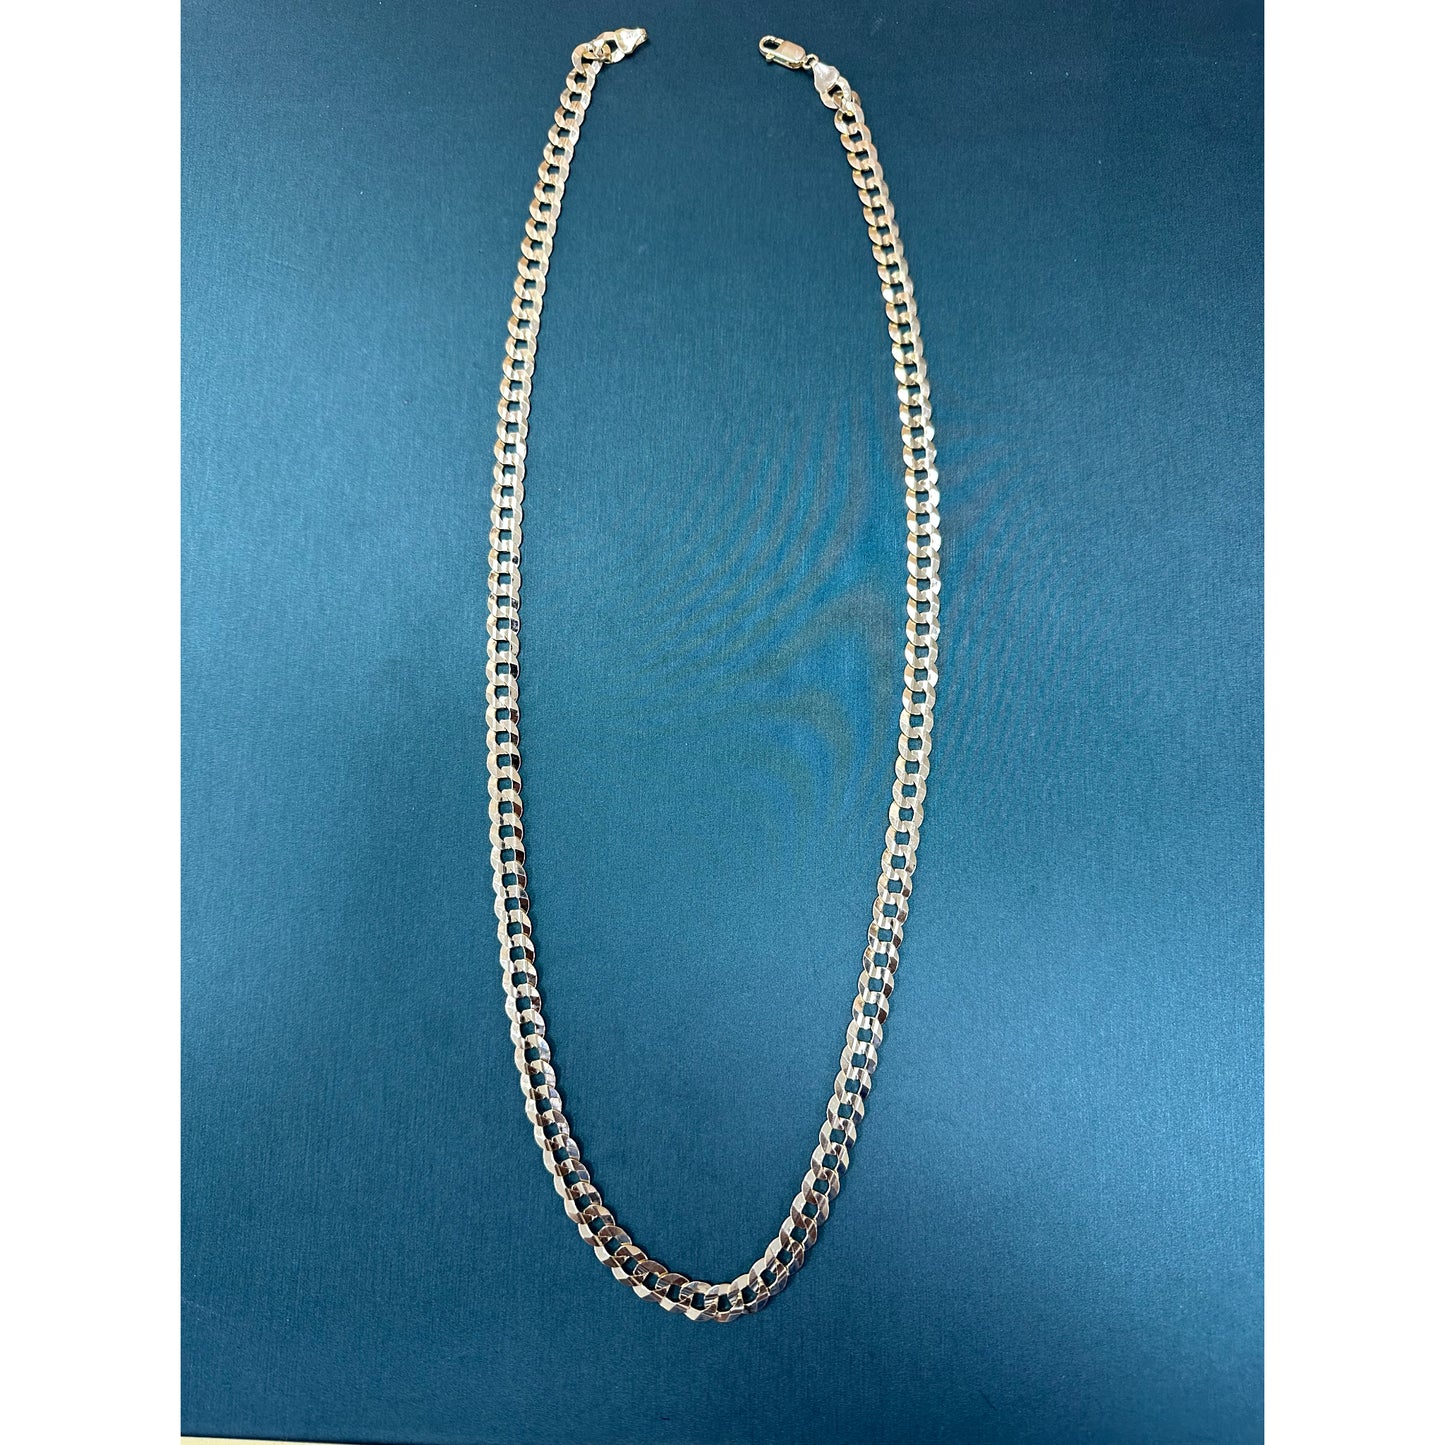 Curb Link Chain 7.5mm 26 inches 14k